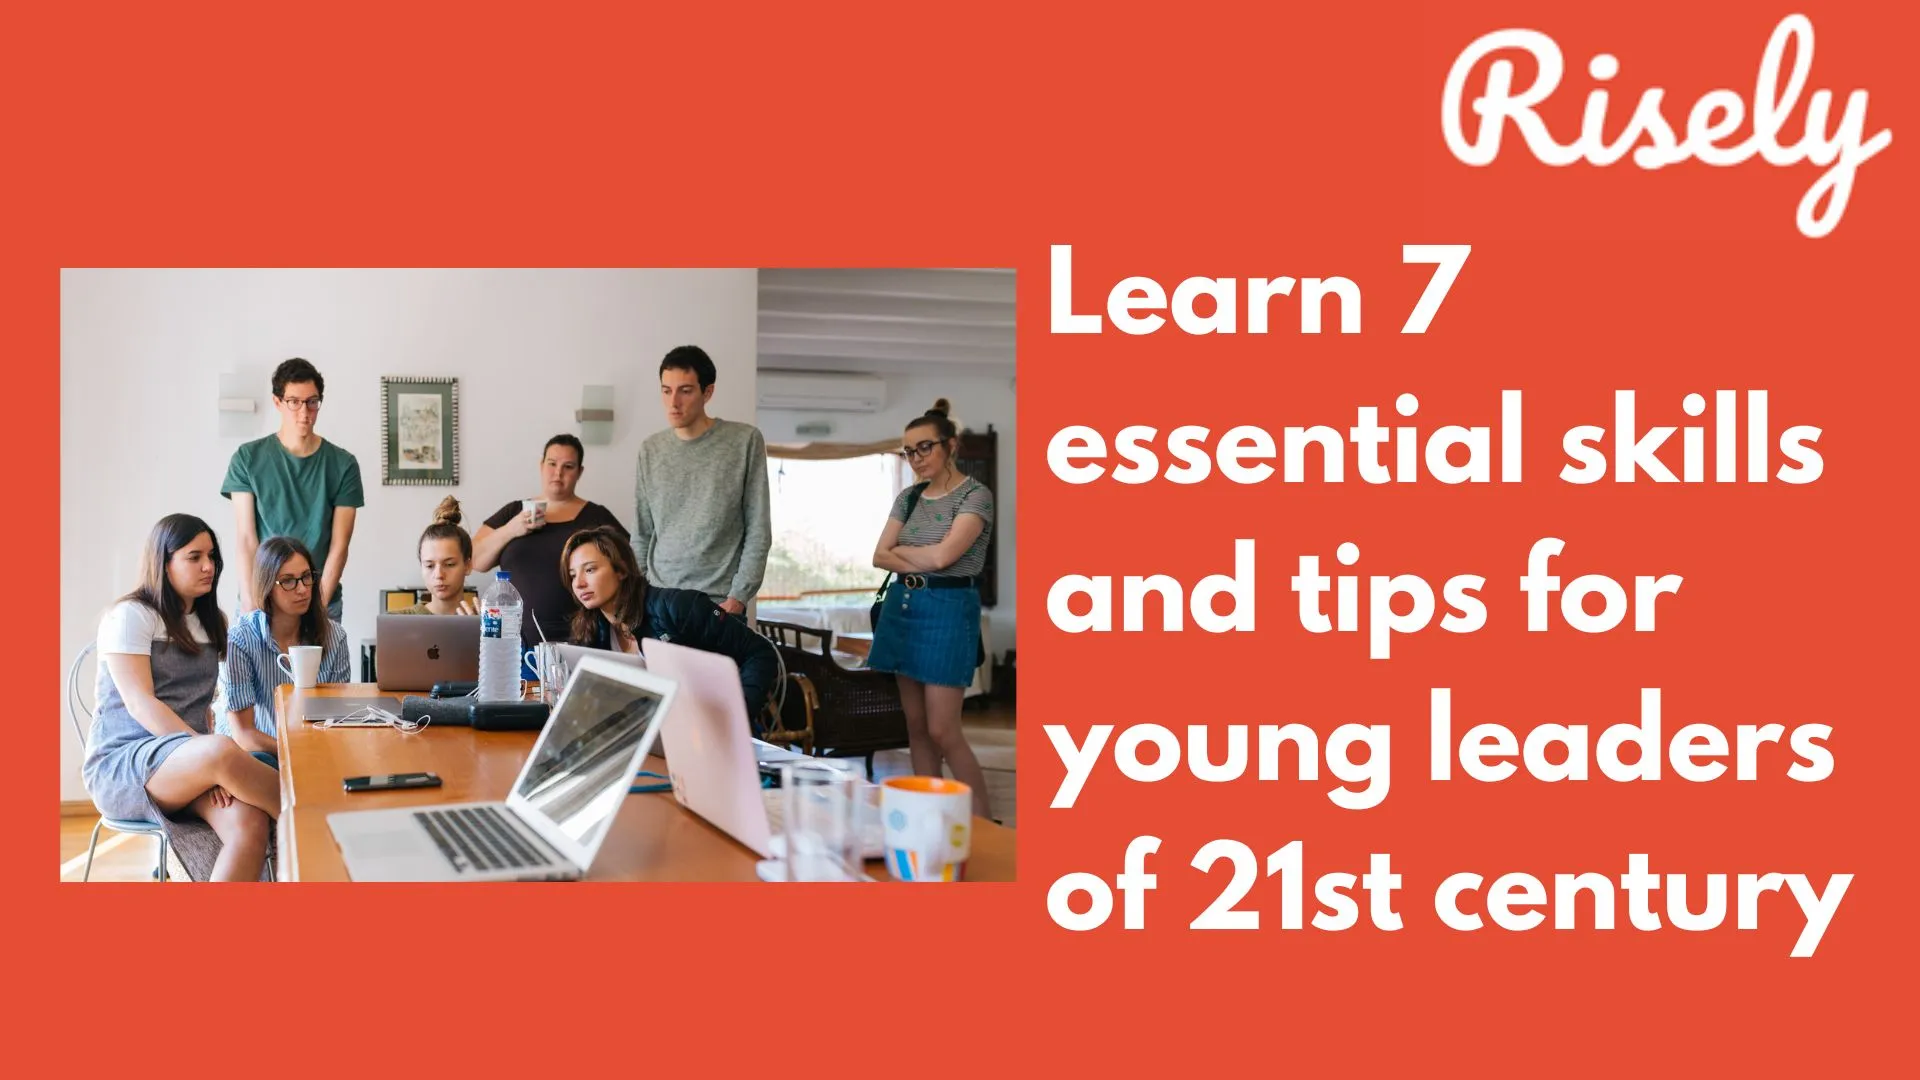 Learn 7 essential skills and tips for young leaders of 21st century- Risely Featured Image